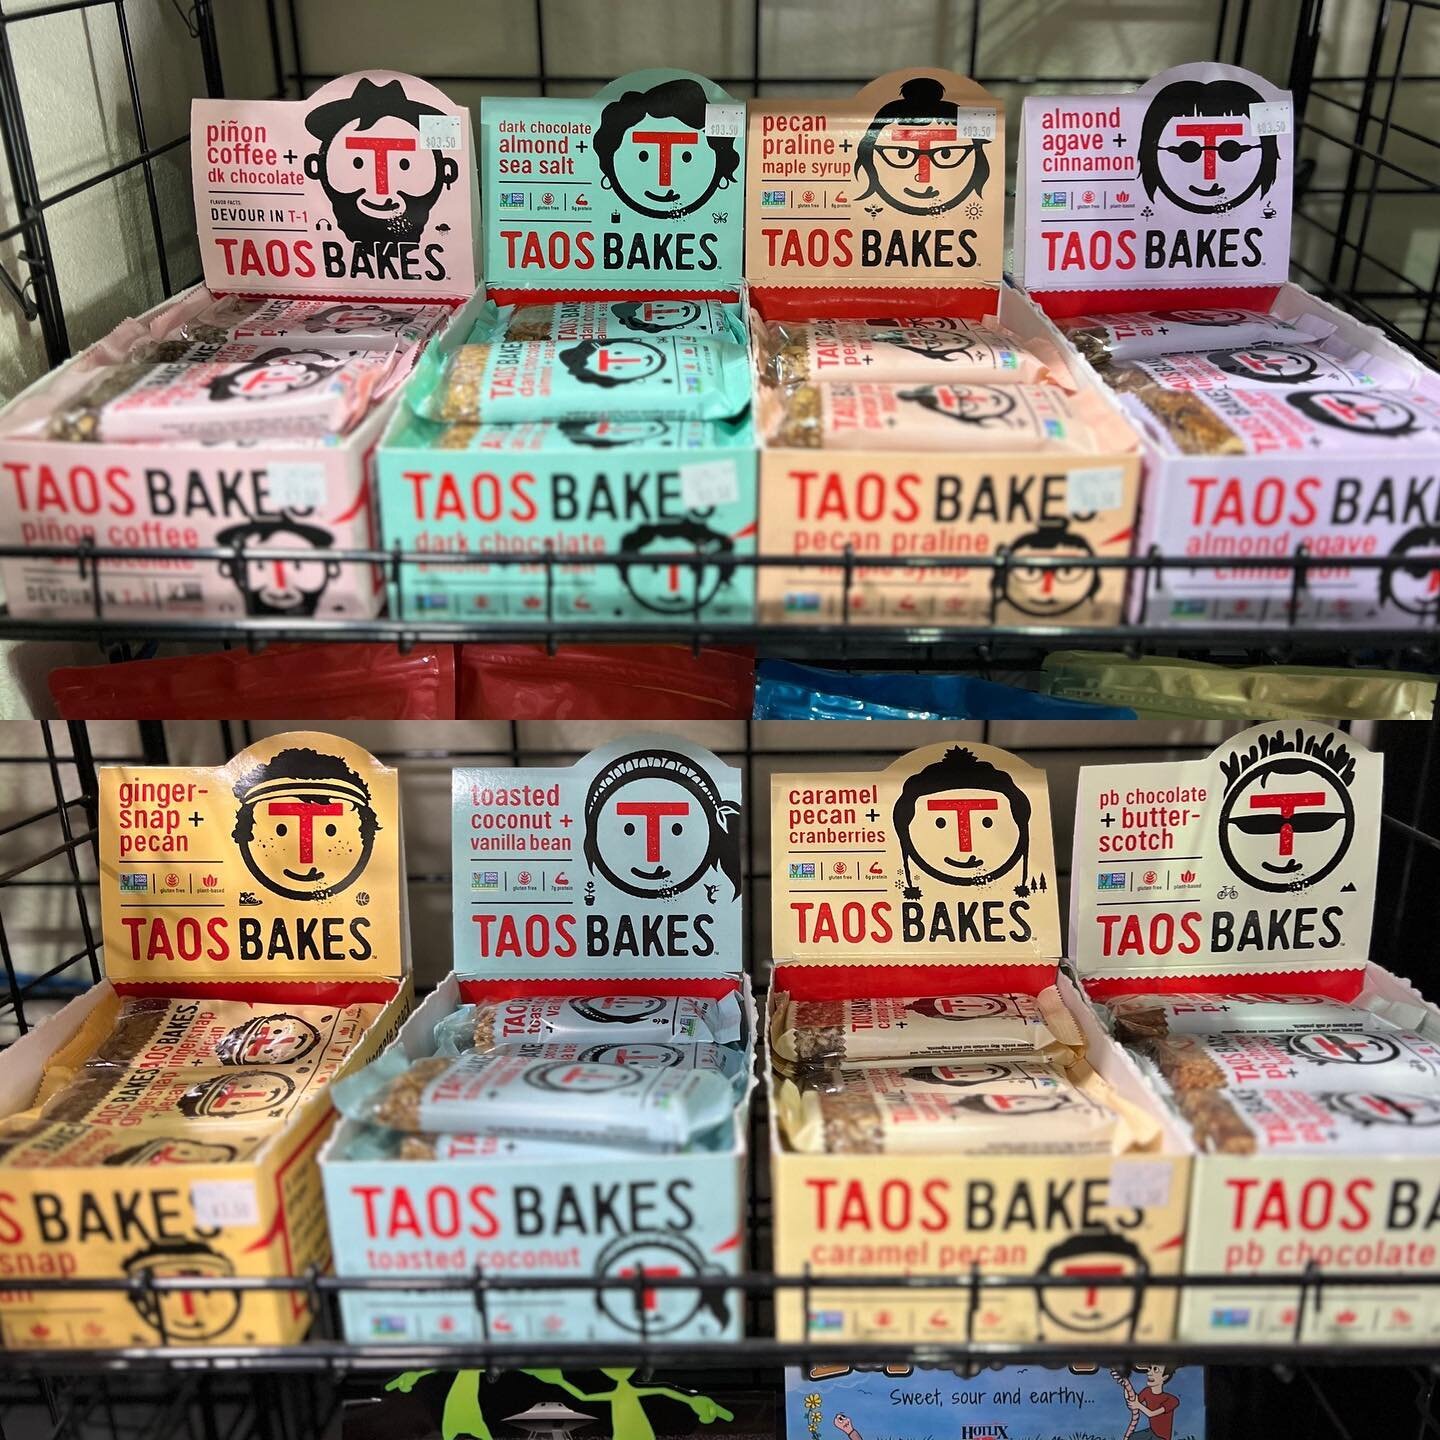 Just restocked on every flavor of @taosbakes bars!  Which one is your favorite?
.
.
#moonmanprinting #roswellnm #roswellnewmexico #downtownroswell #mainstreetroswell #roswellgiftshop #taosbakes #taosbakesisthebest #taosbakes👍